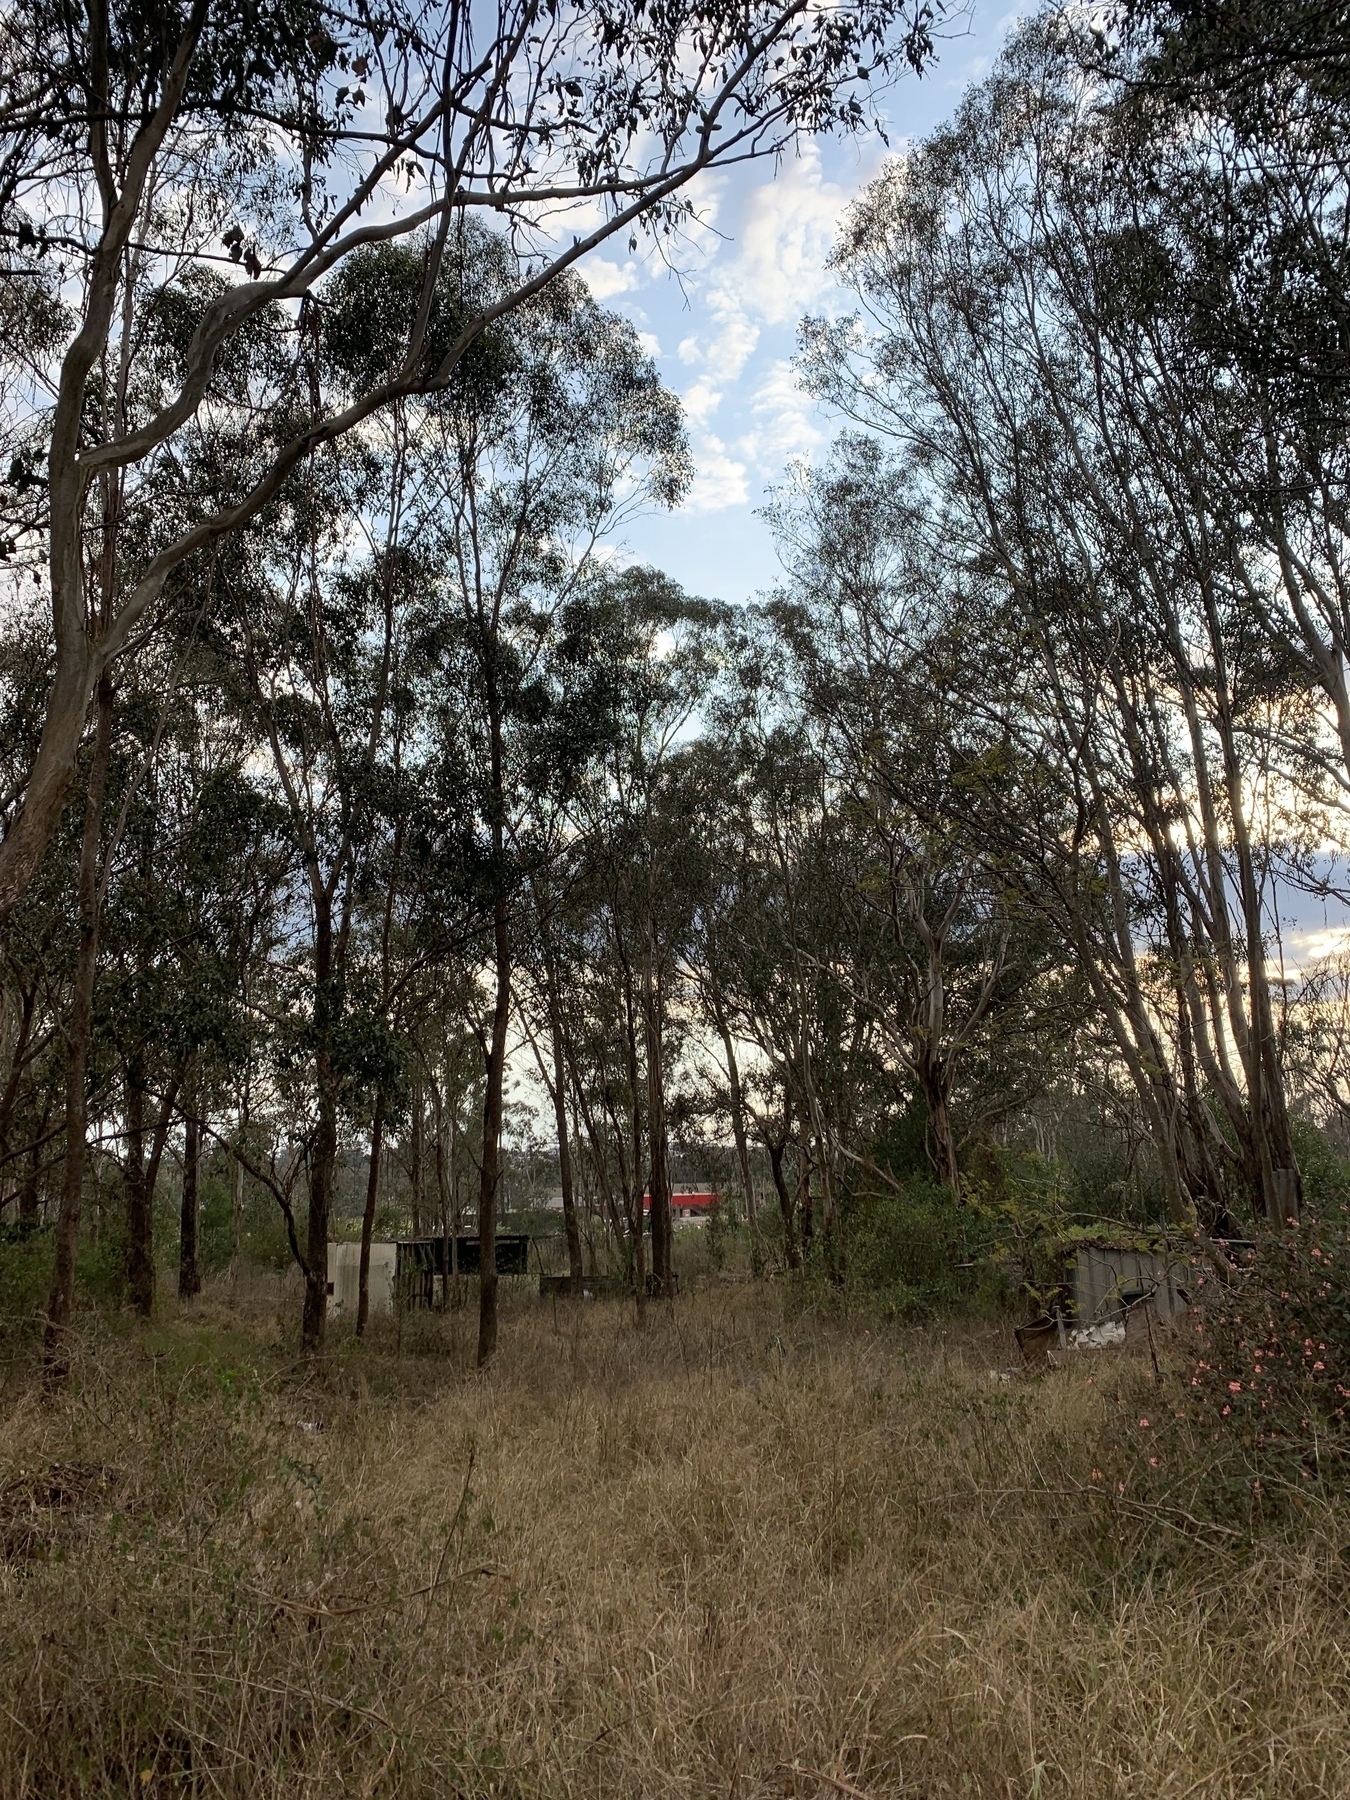 An early morning photo of a semi-rural Australian backyard with some native trees, a bunch of weeds and two dilapidated, overgrown sheds